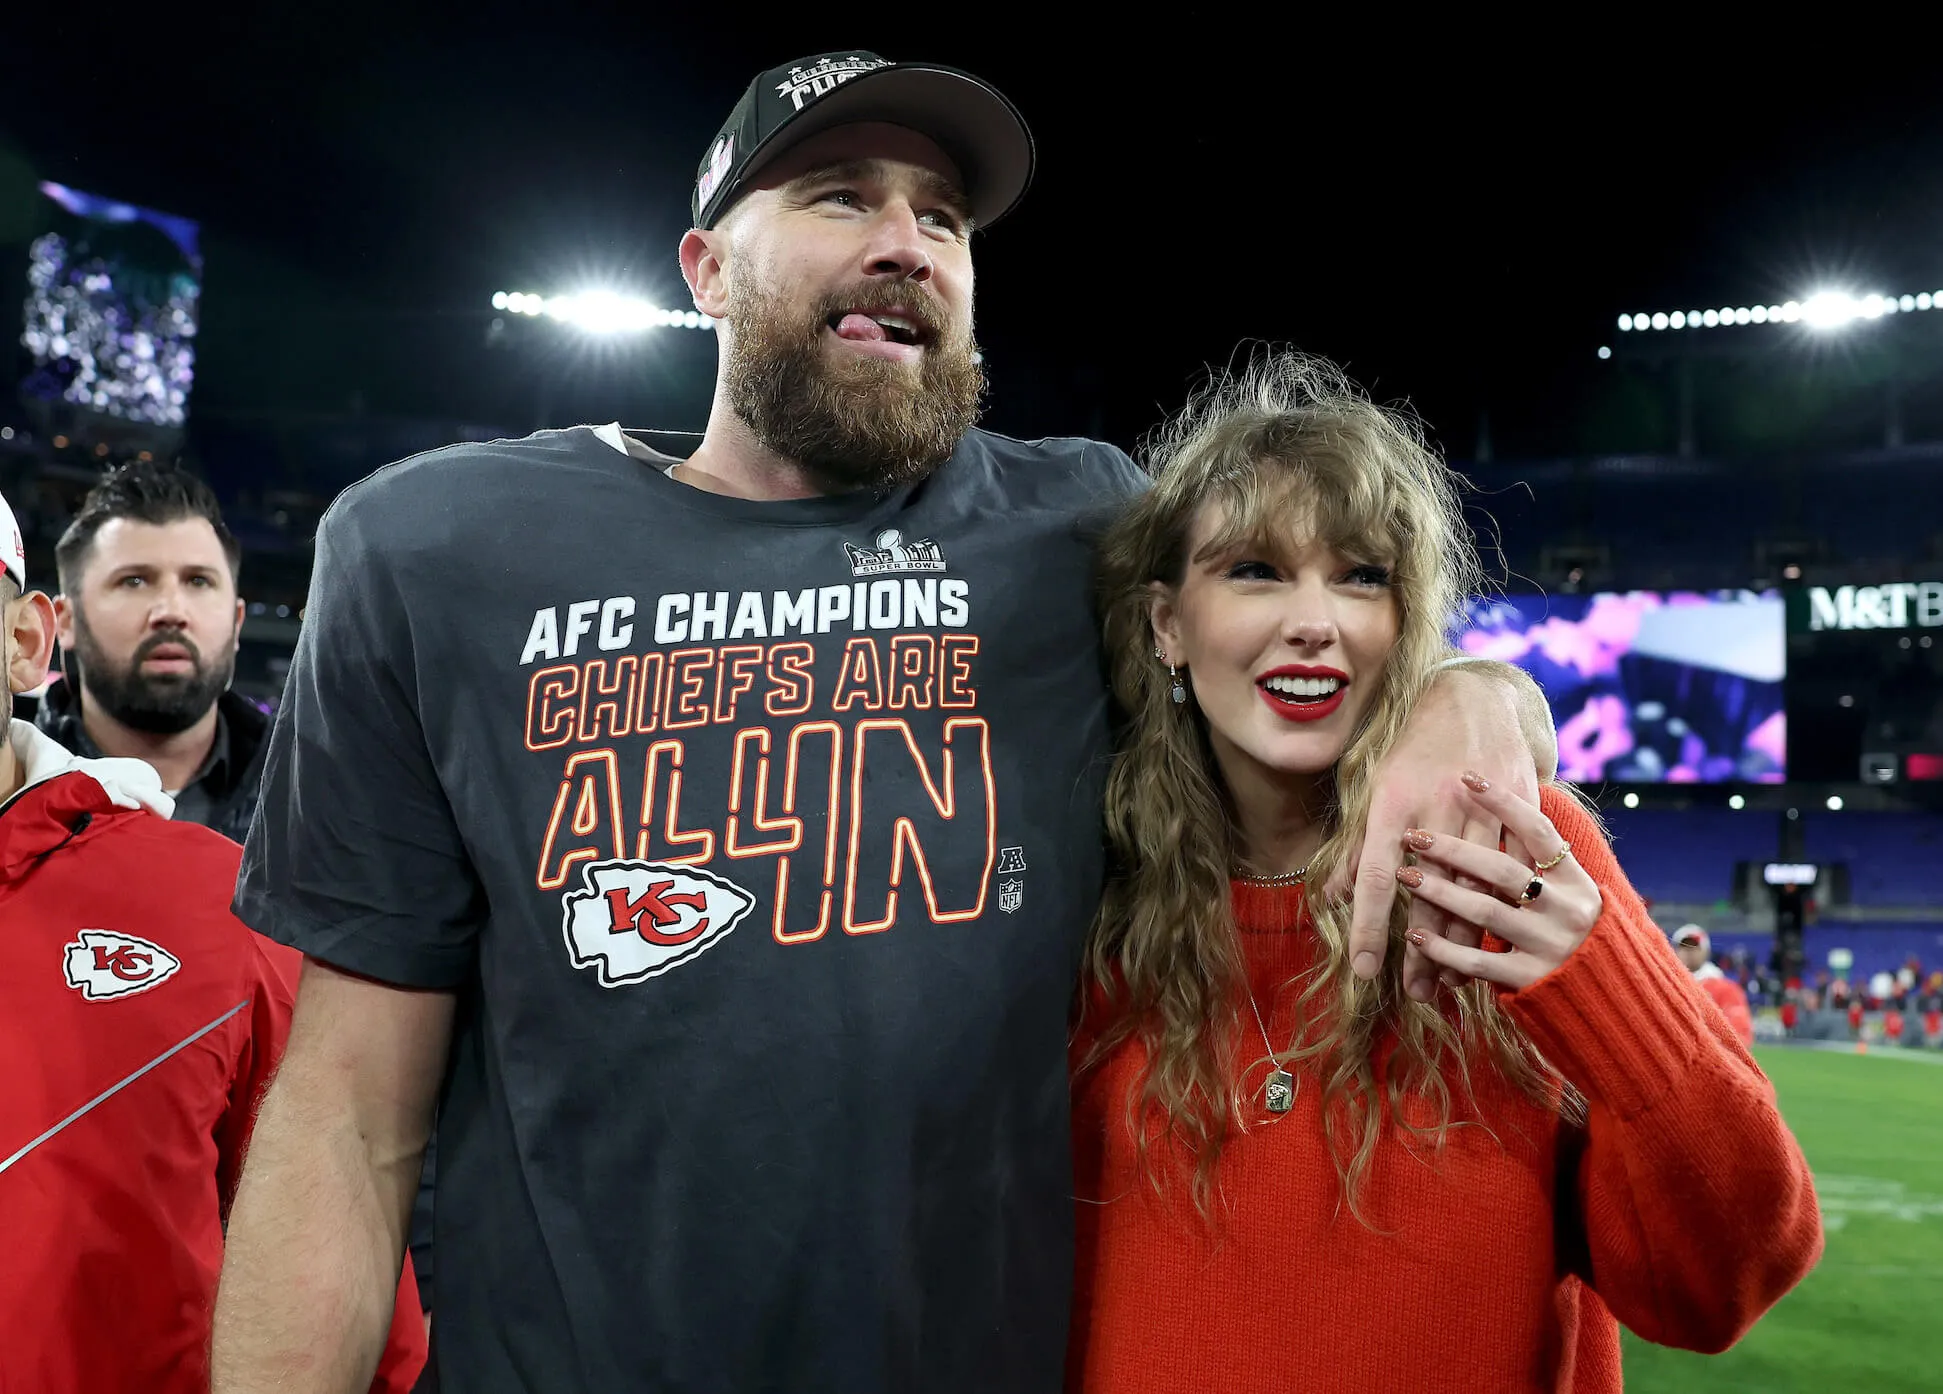 Travis Kelce in his Kansas City Chiefs uniform with his arm around Taylor Swift, who's smiling. They celebrate Kelce's NFL victory against the Baltimore Ravens.